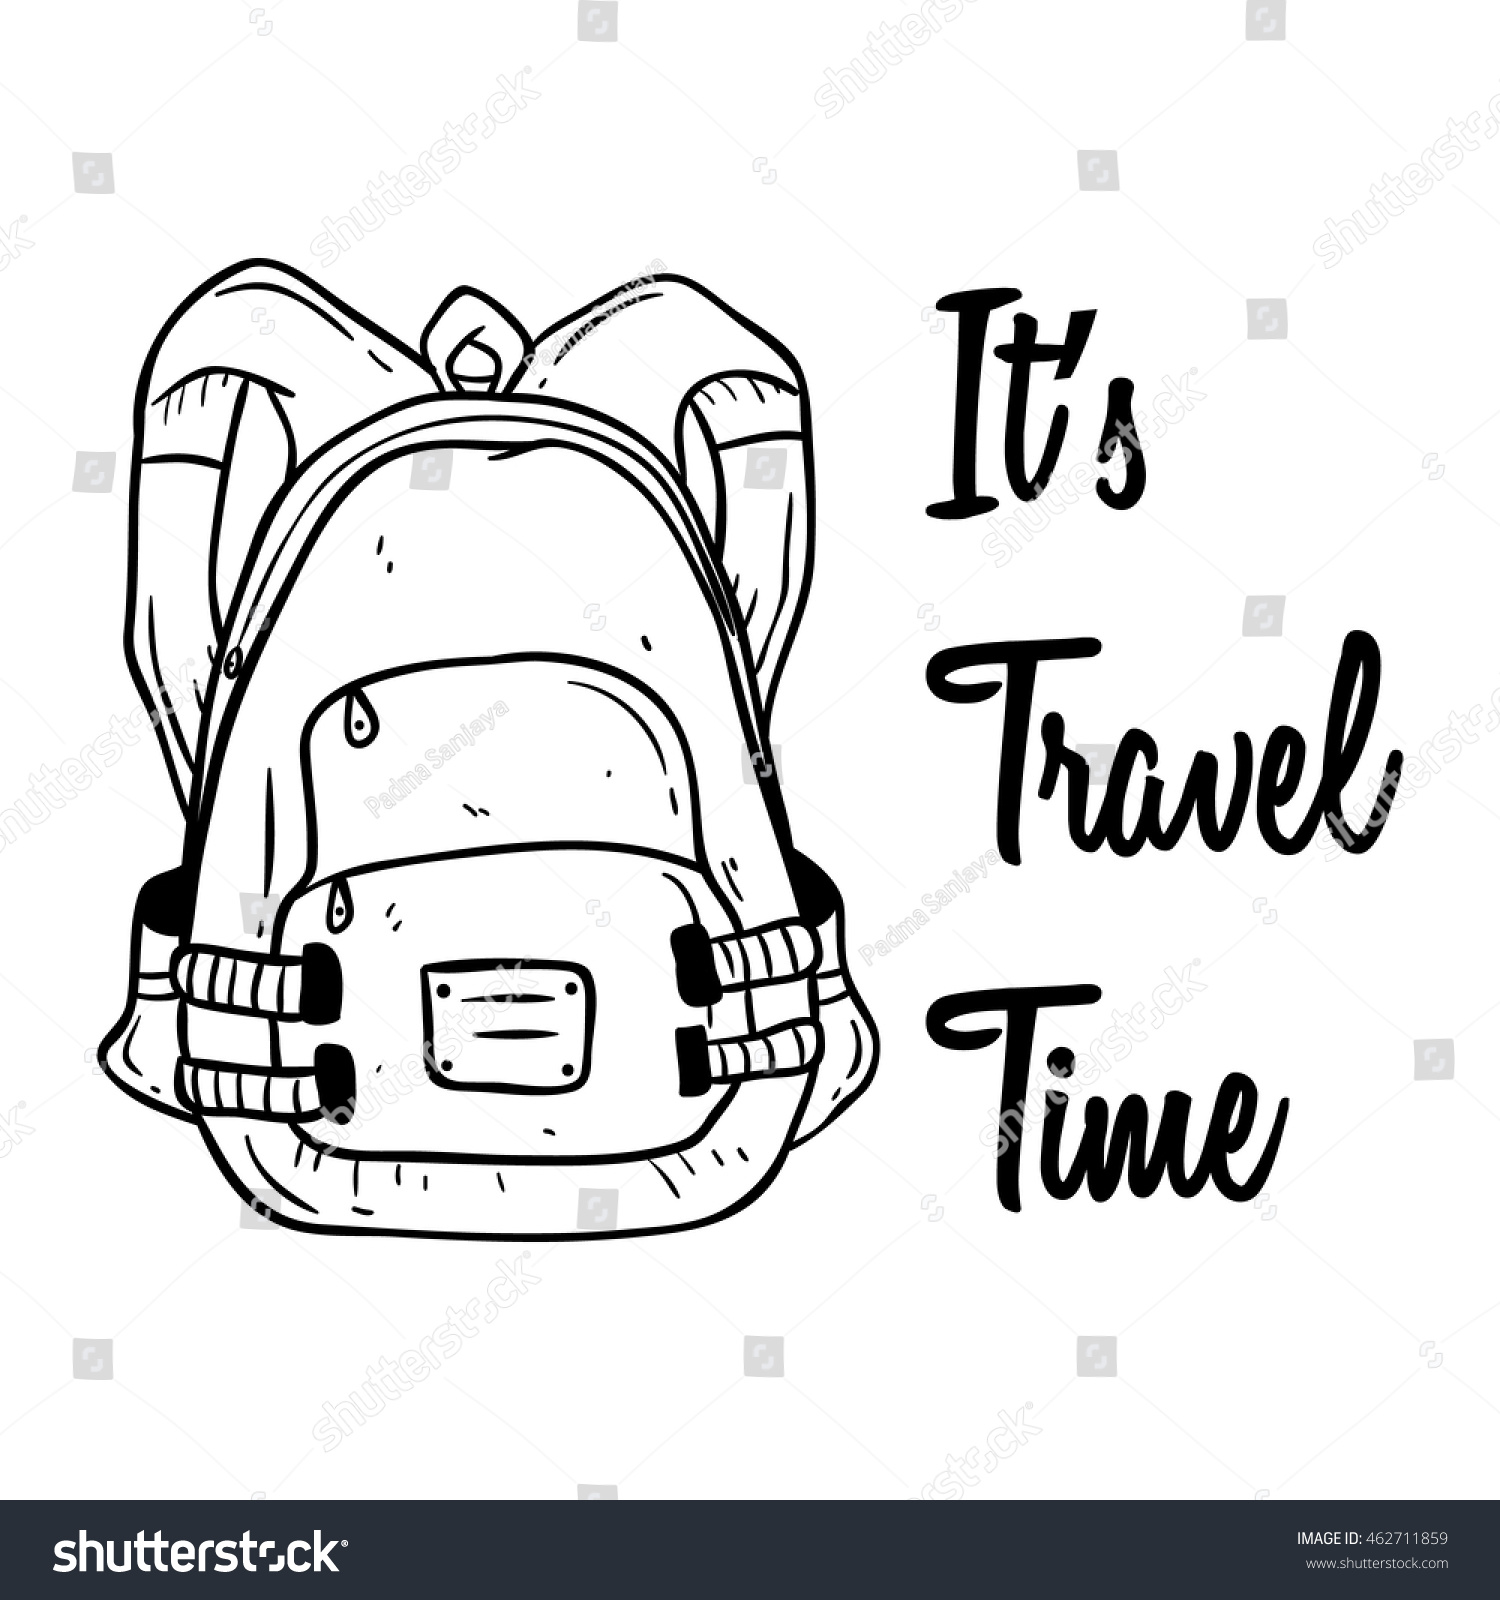 Travel Backpack Text Using Doodle Art Stock Vector Royalty Free